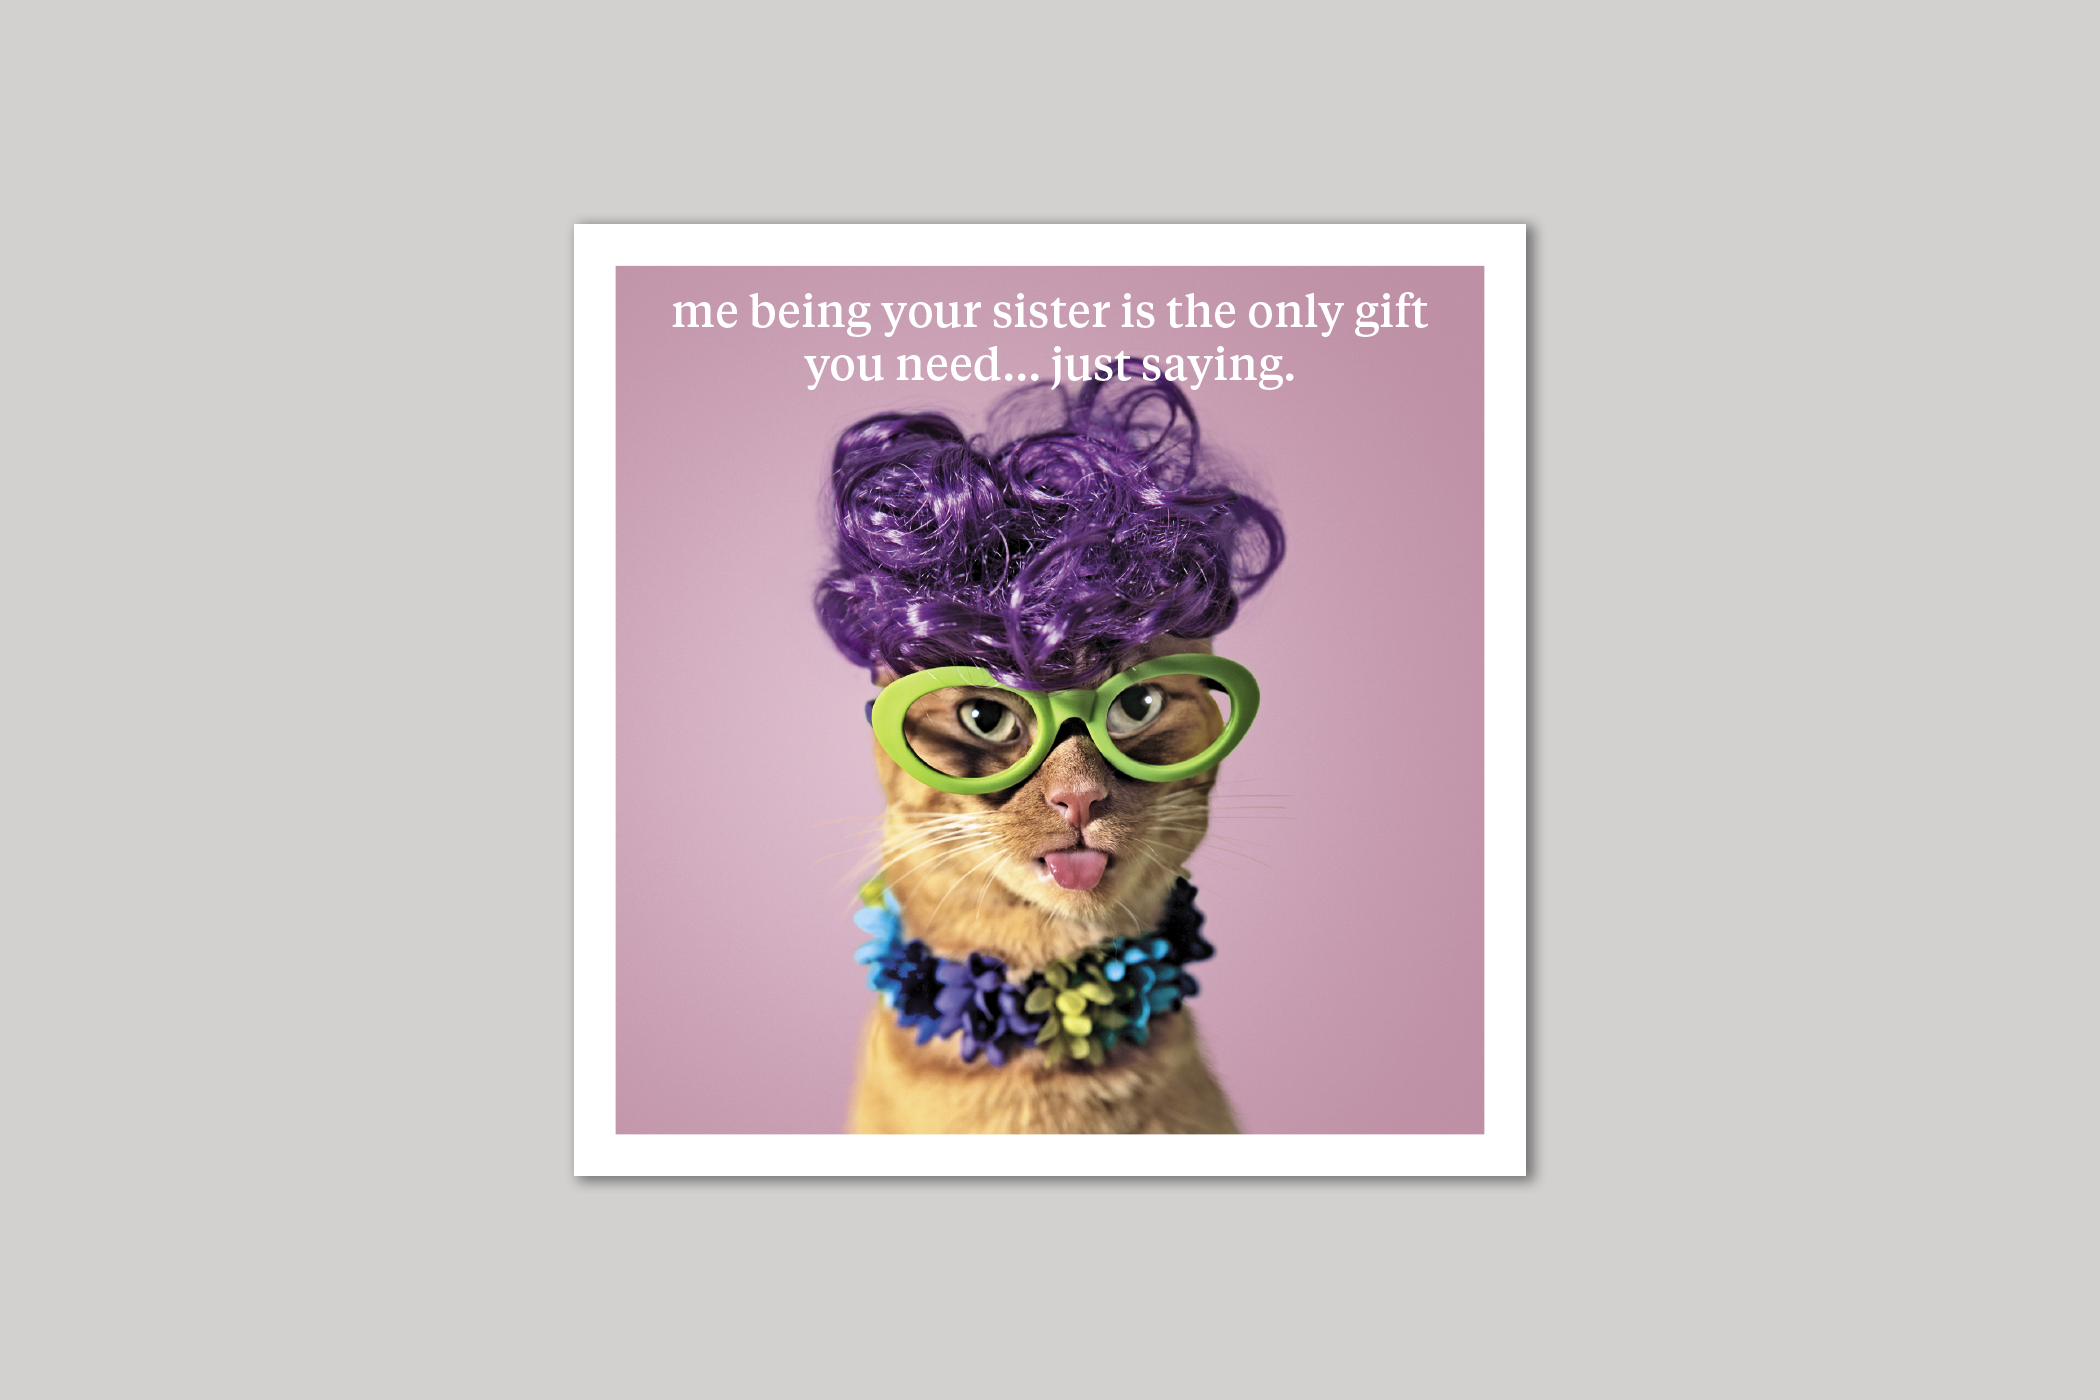 Just Saying sister card quirky animal portrait from Curious World range of greeting cards by Icon.